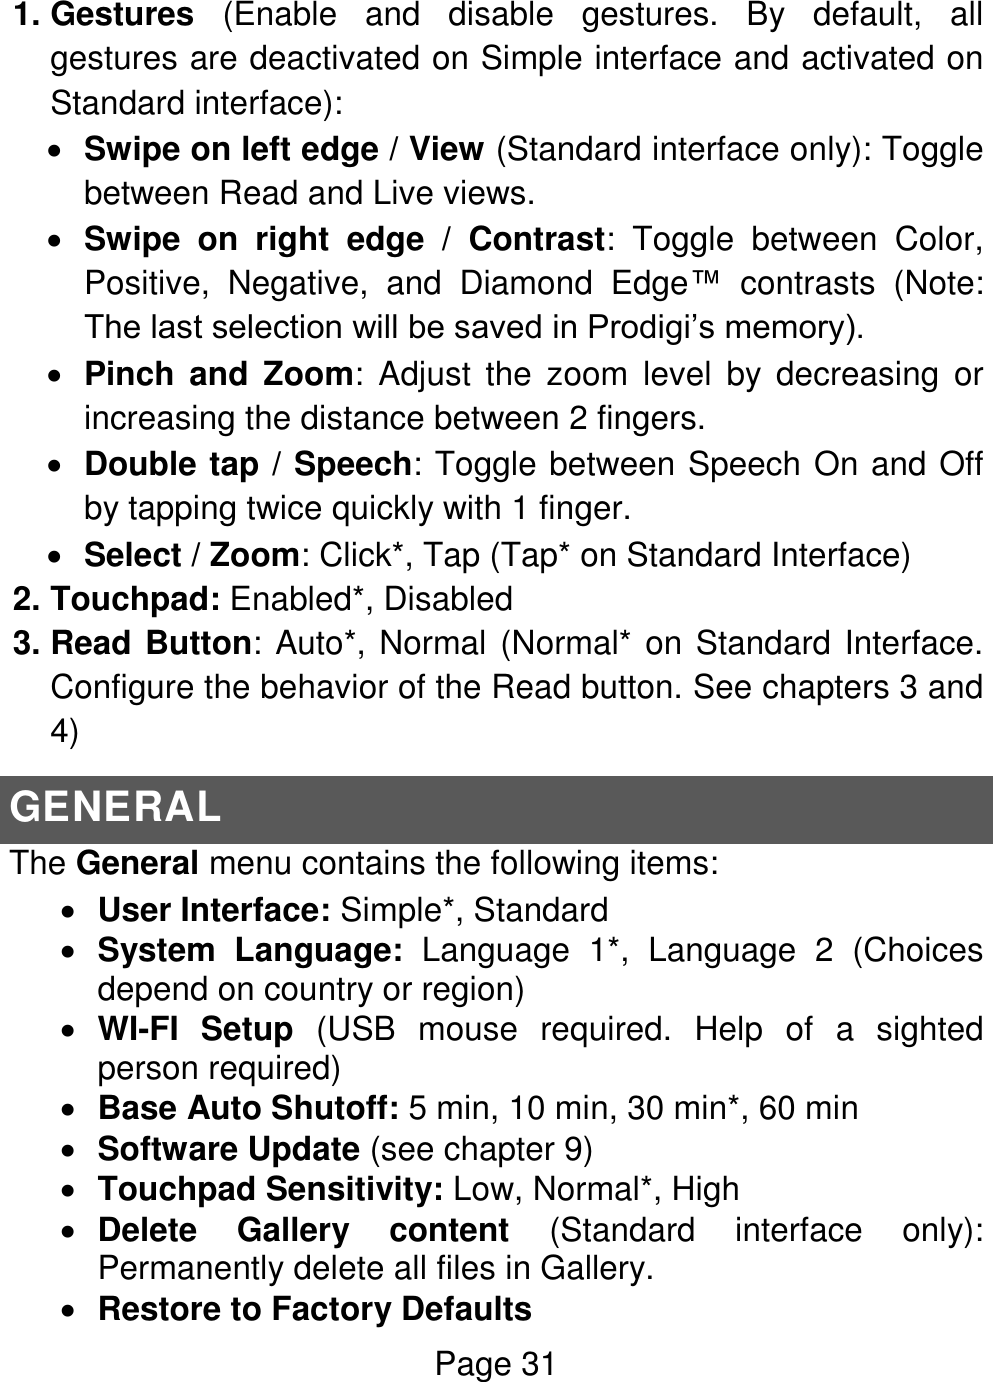 Page 31  1. Gestures  (Enable  and  disable  gestures.  By  default,  all gestures are deactivated on Simple interface and activated on Standard interface):  Swipe on left edge / View (Standard interface only): Toggle between Read and Live views.  Swipe  on  right  edge  /  Contrast:  Toggle  between  Color, Positive,  Negative,  and  Diamond  Edge™  contrasts  (Note: The last selection will be saved in Prodigi’s memory).  Pinch  and  Zoom:  Adjust  the  zoom  level  by  decreasing  or increasing the distance between 2 fingers.  Double tap / Speech: Toggle between Speech On and Off by tapping twice quickly with 1 finger.  Select / Zoom: Click*, Tap (Tap* on Standard Interface) 2. Touchpad: Enabled*, Disabled 3. Read Button: Auto*, Normal (Normal* on Standard Interface. Configure the behavior of the Read button. See chapters 3 and 4)  GENERAL The General menu contains the following items:  User Interface: Simple*, Standard  System  Language:  Language  1*,  Language  2  (Choices depend on country or region)  WI-FI  Setup  (USB  mouse  required.  Help  of  a  sighted person required)  Base Auto Shutoff: 5 min, 10 min, 30 min*, 60 min  Software Update (see chapter 9)  Touchpad Sensitivity: Low, Normal*, High  Delete  Gallery  content  (Standard  interface  only): Permanently delete all files in Gallery.  Restore to Factory Defaults 